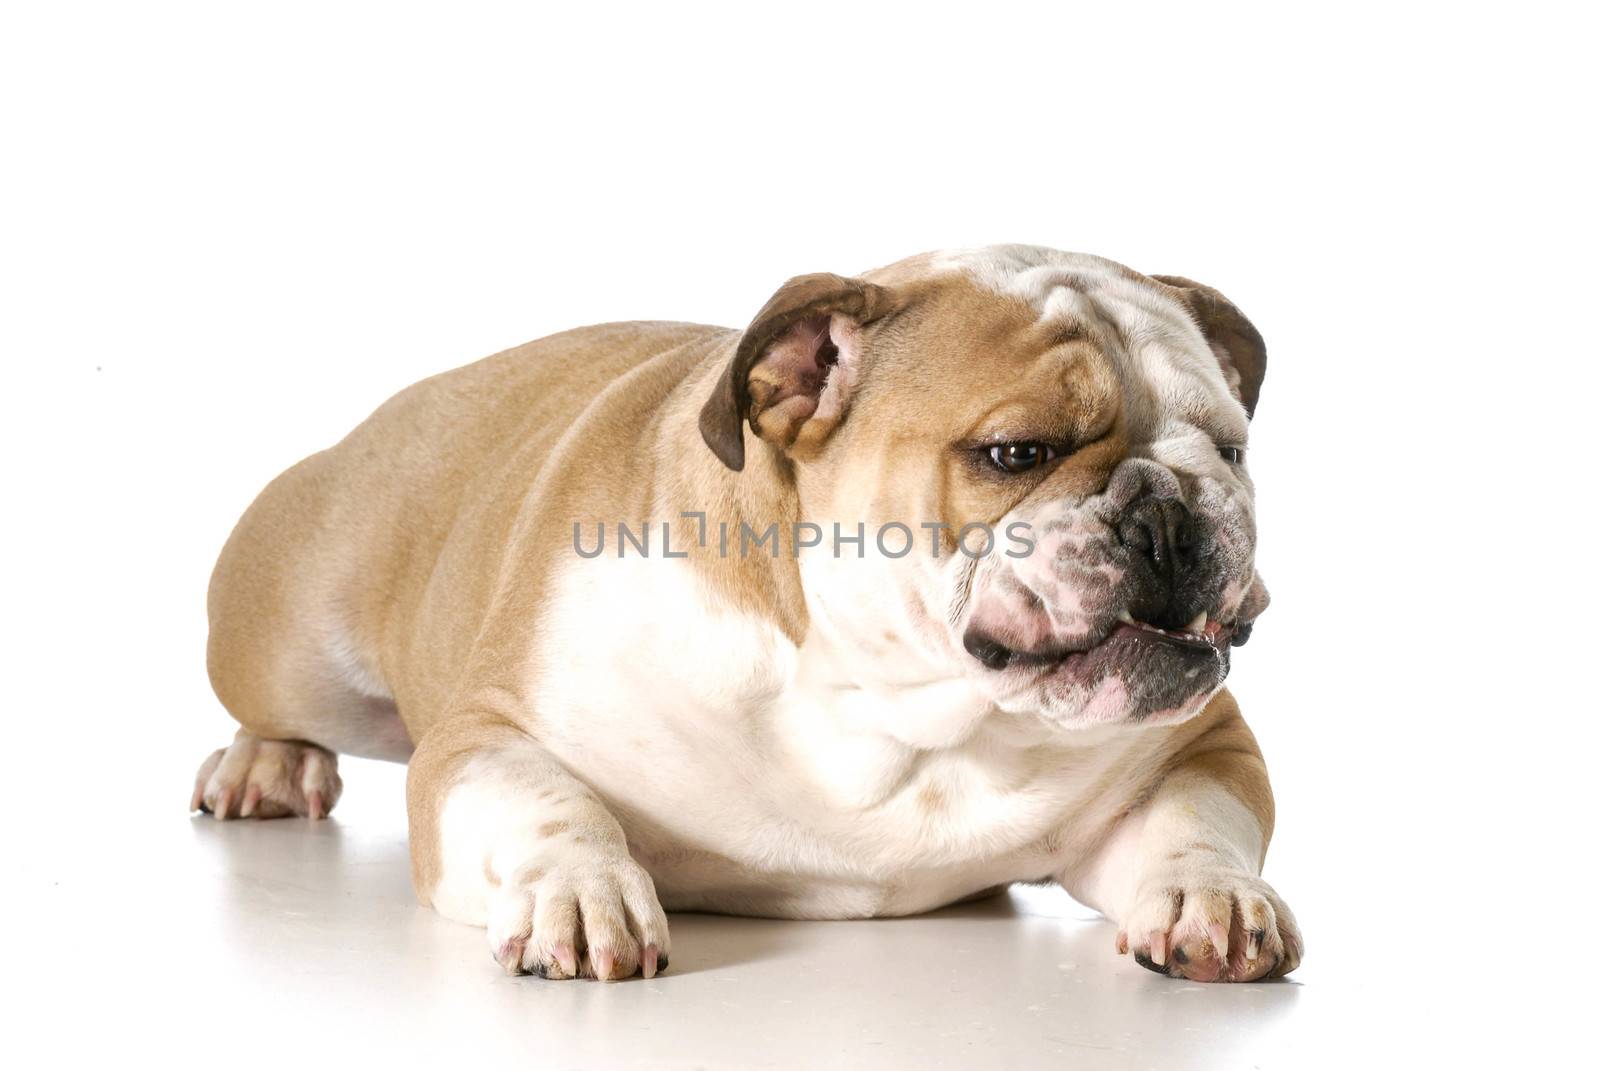 aggressive looking dog - english bulldog with teeth showing and growl isolated on white background